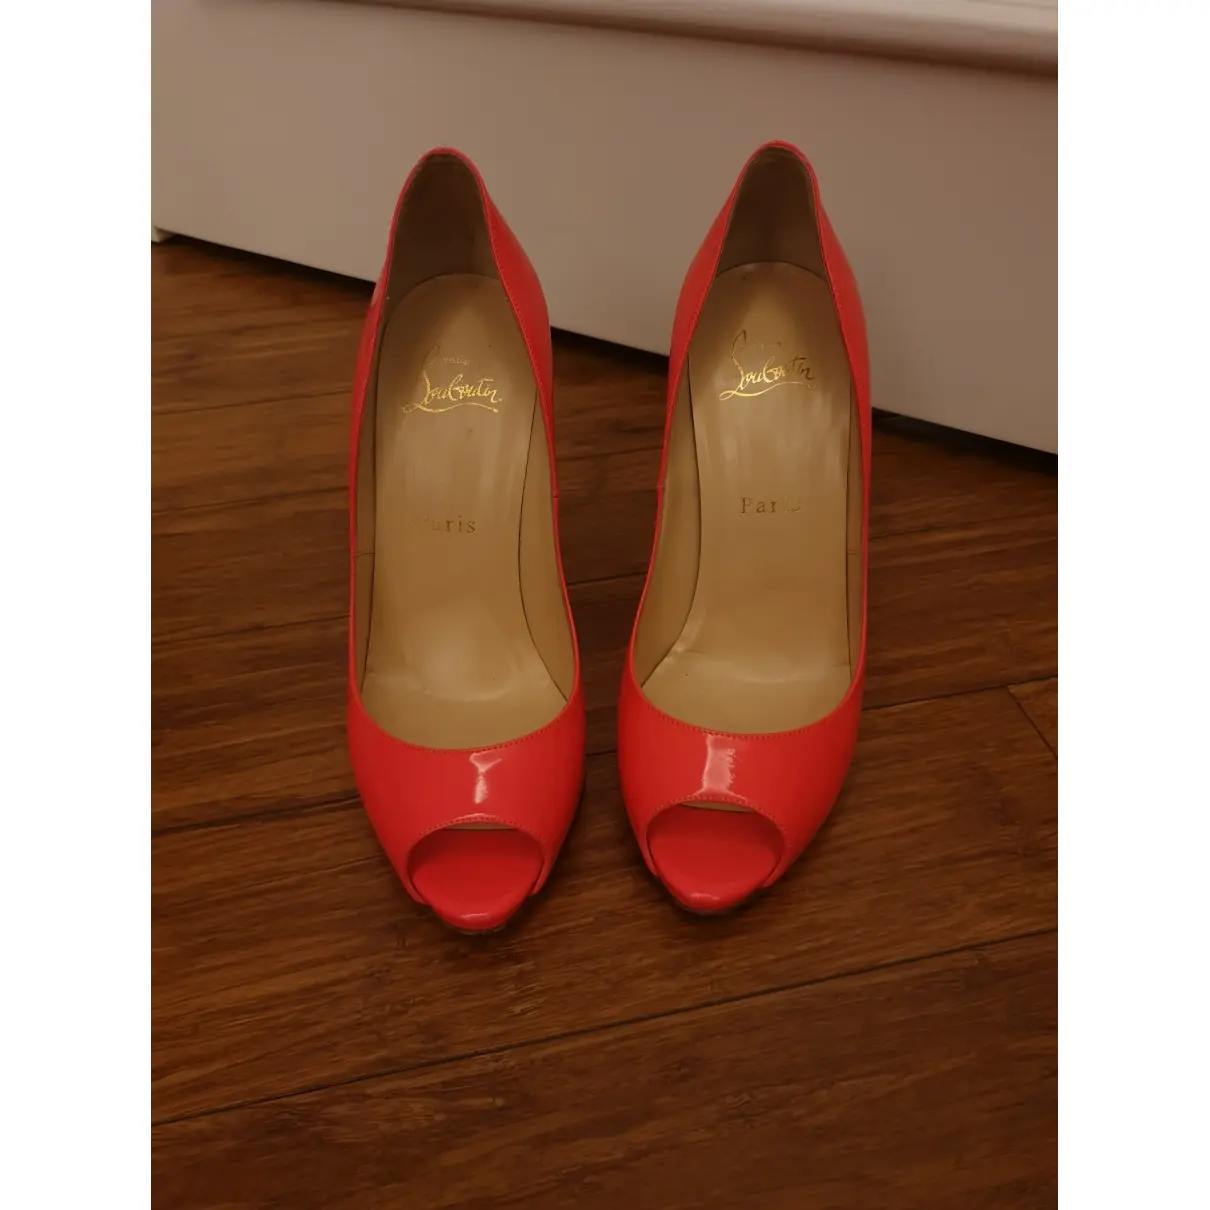 Christian Louboutin Very Privé patent leather heels for sale